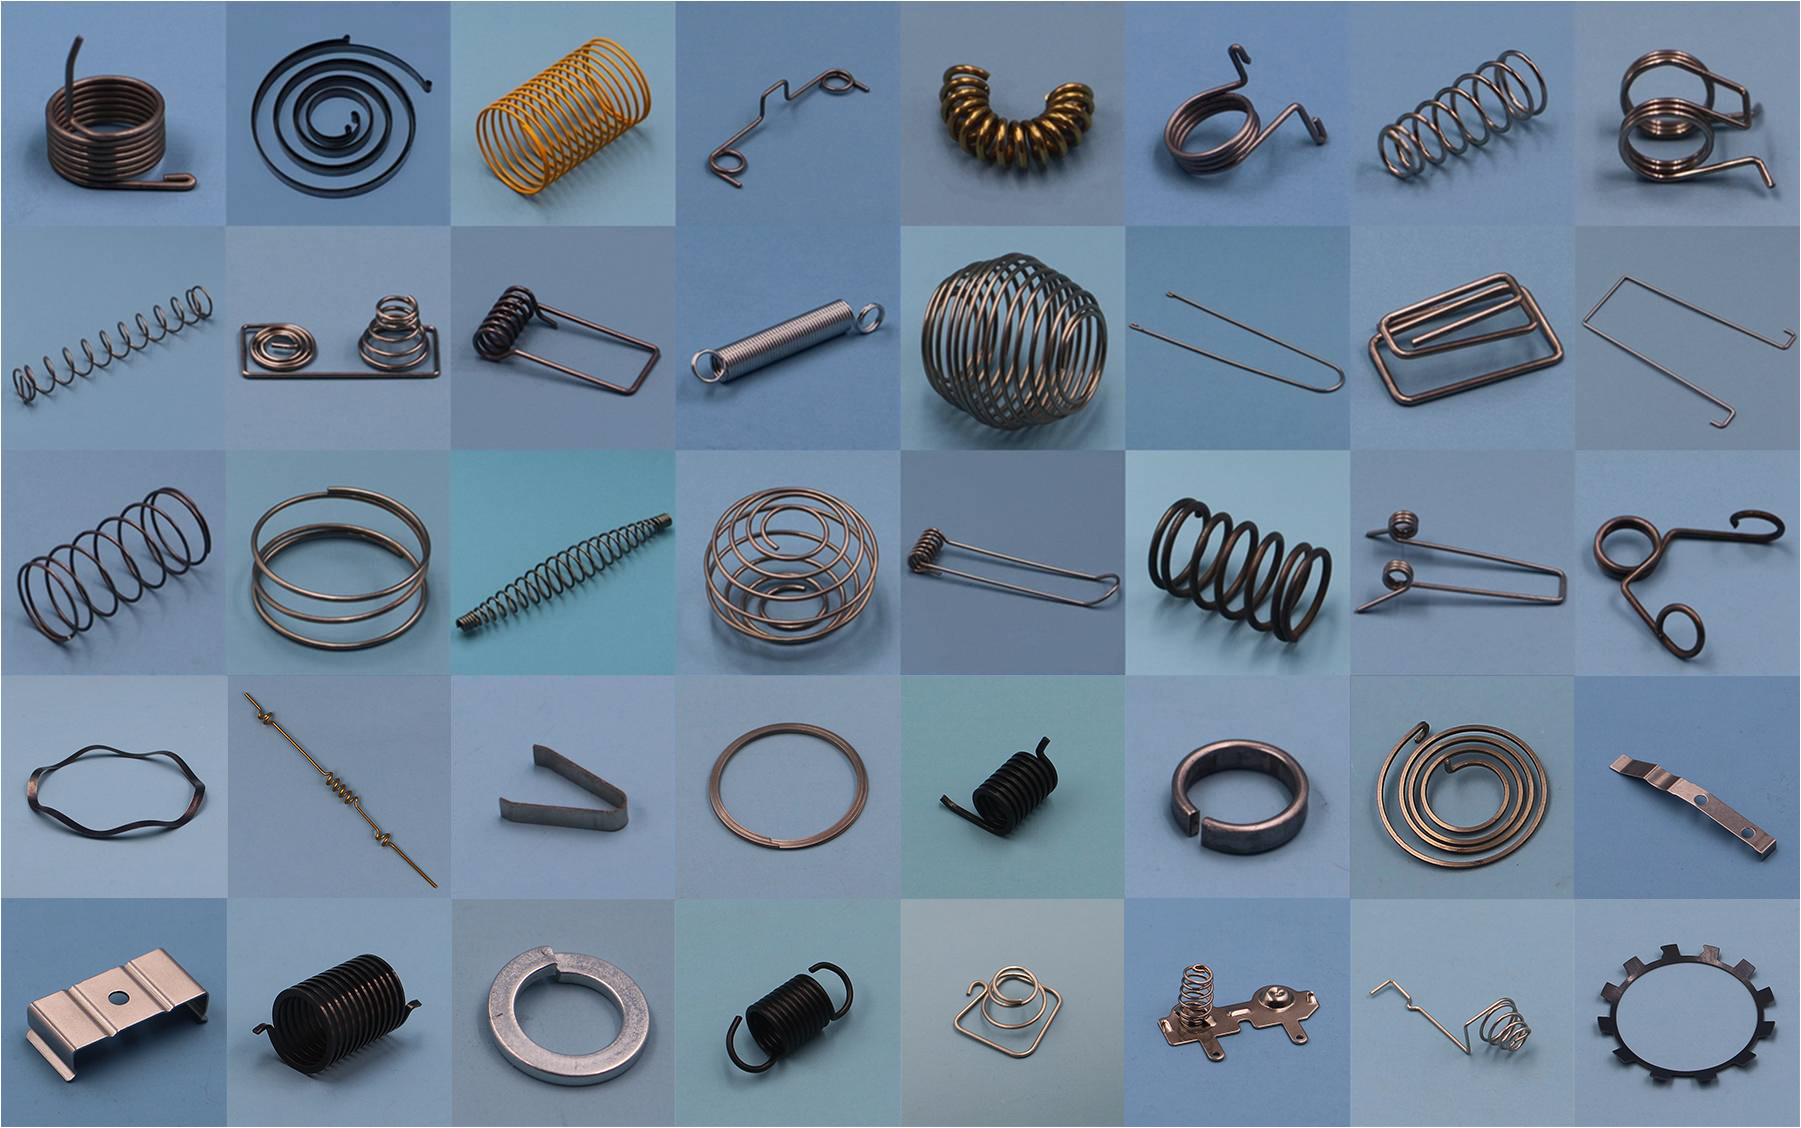 ●Springs and various wire forming products